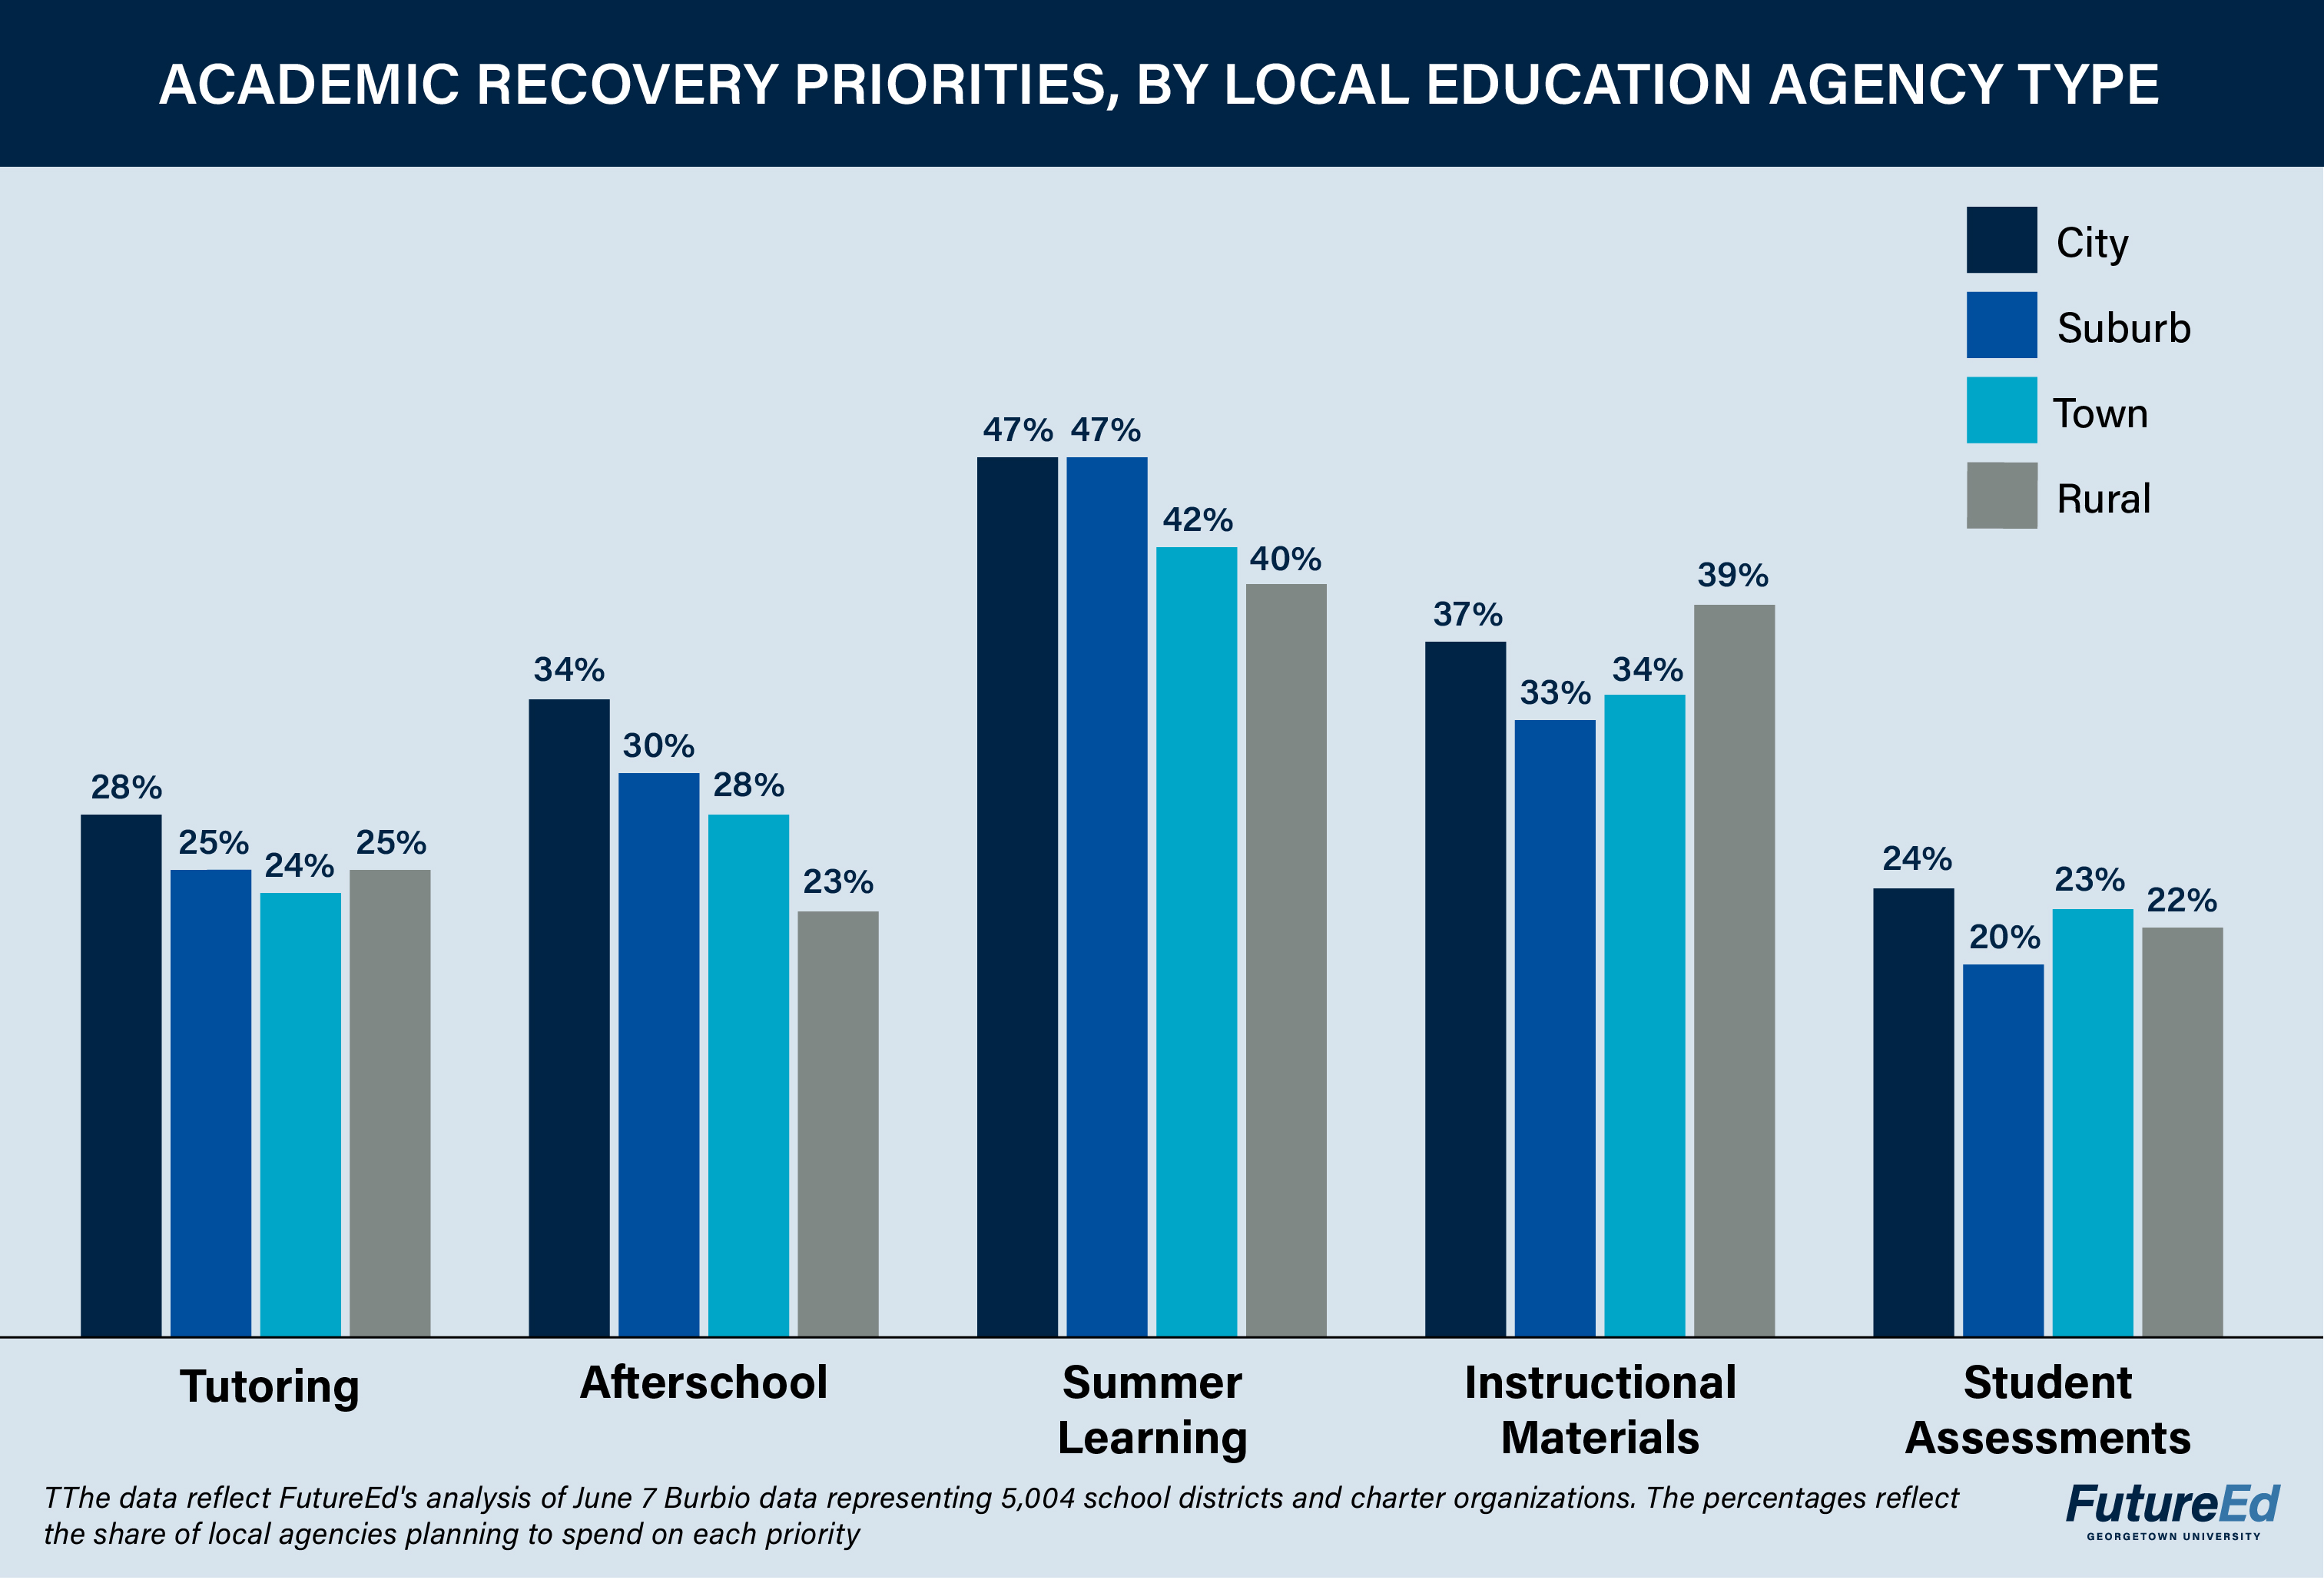 Chart: Academic Recovery Priorities, by Local Education Agency Type. Tutoring: City 28%, suburb 25%, town 24%, rural 25%. Afterschool: city 34%, suburb 30%, town 28%, rural 23%. Summer learning: city 47%, suburb 47%, town 42%, rural 40%. Instructional materials: city 37%, suburb 33%, town 34%, rural 39%. Student assessments: city 24%, suburb 20%, town 23%, rural 22%. (The data reflect FutureEd's analysis of June 7 Burbio data representing 5,004 school districts and charter organizations. The percentages reflect the share of local agencies planning to spend on each priority.)